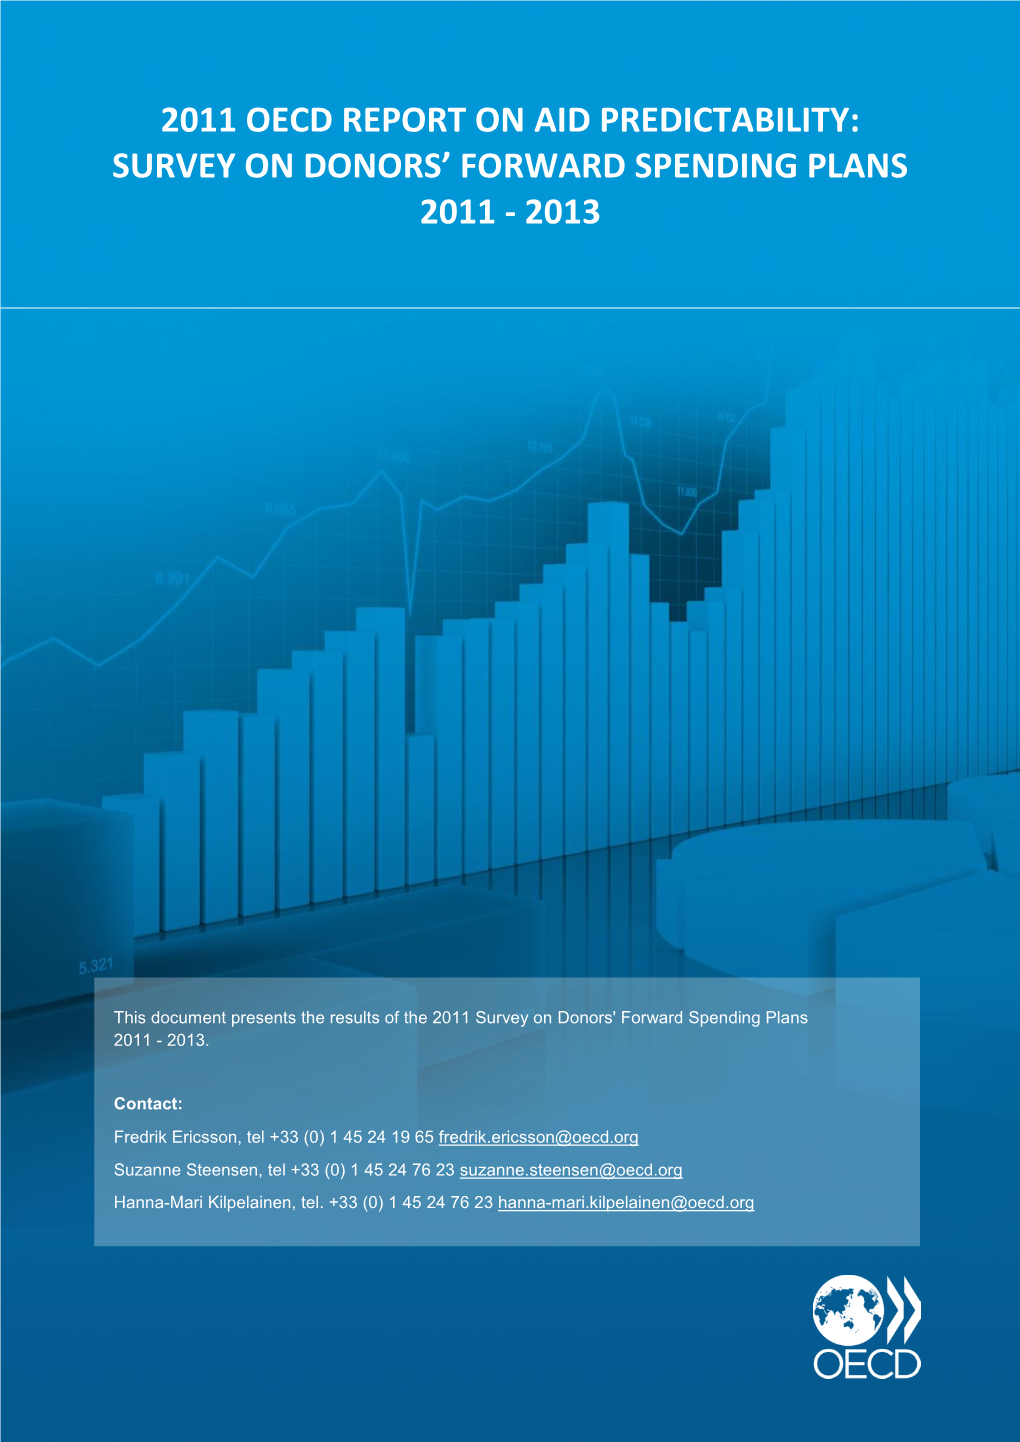 2011 Oecd Report on Aid Predictability: Survey on Donors' Forward Spending Plans 2011